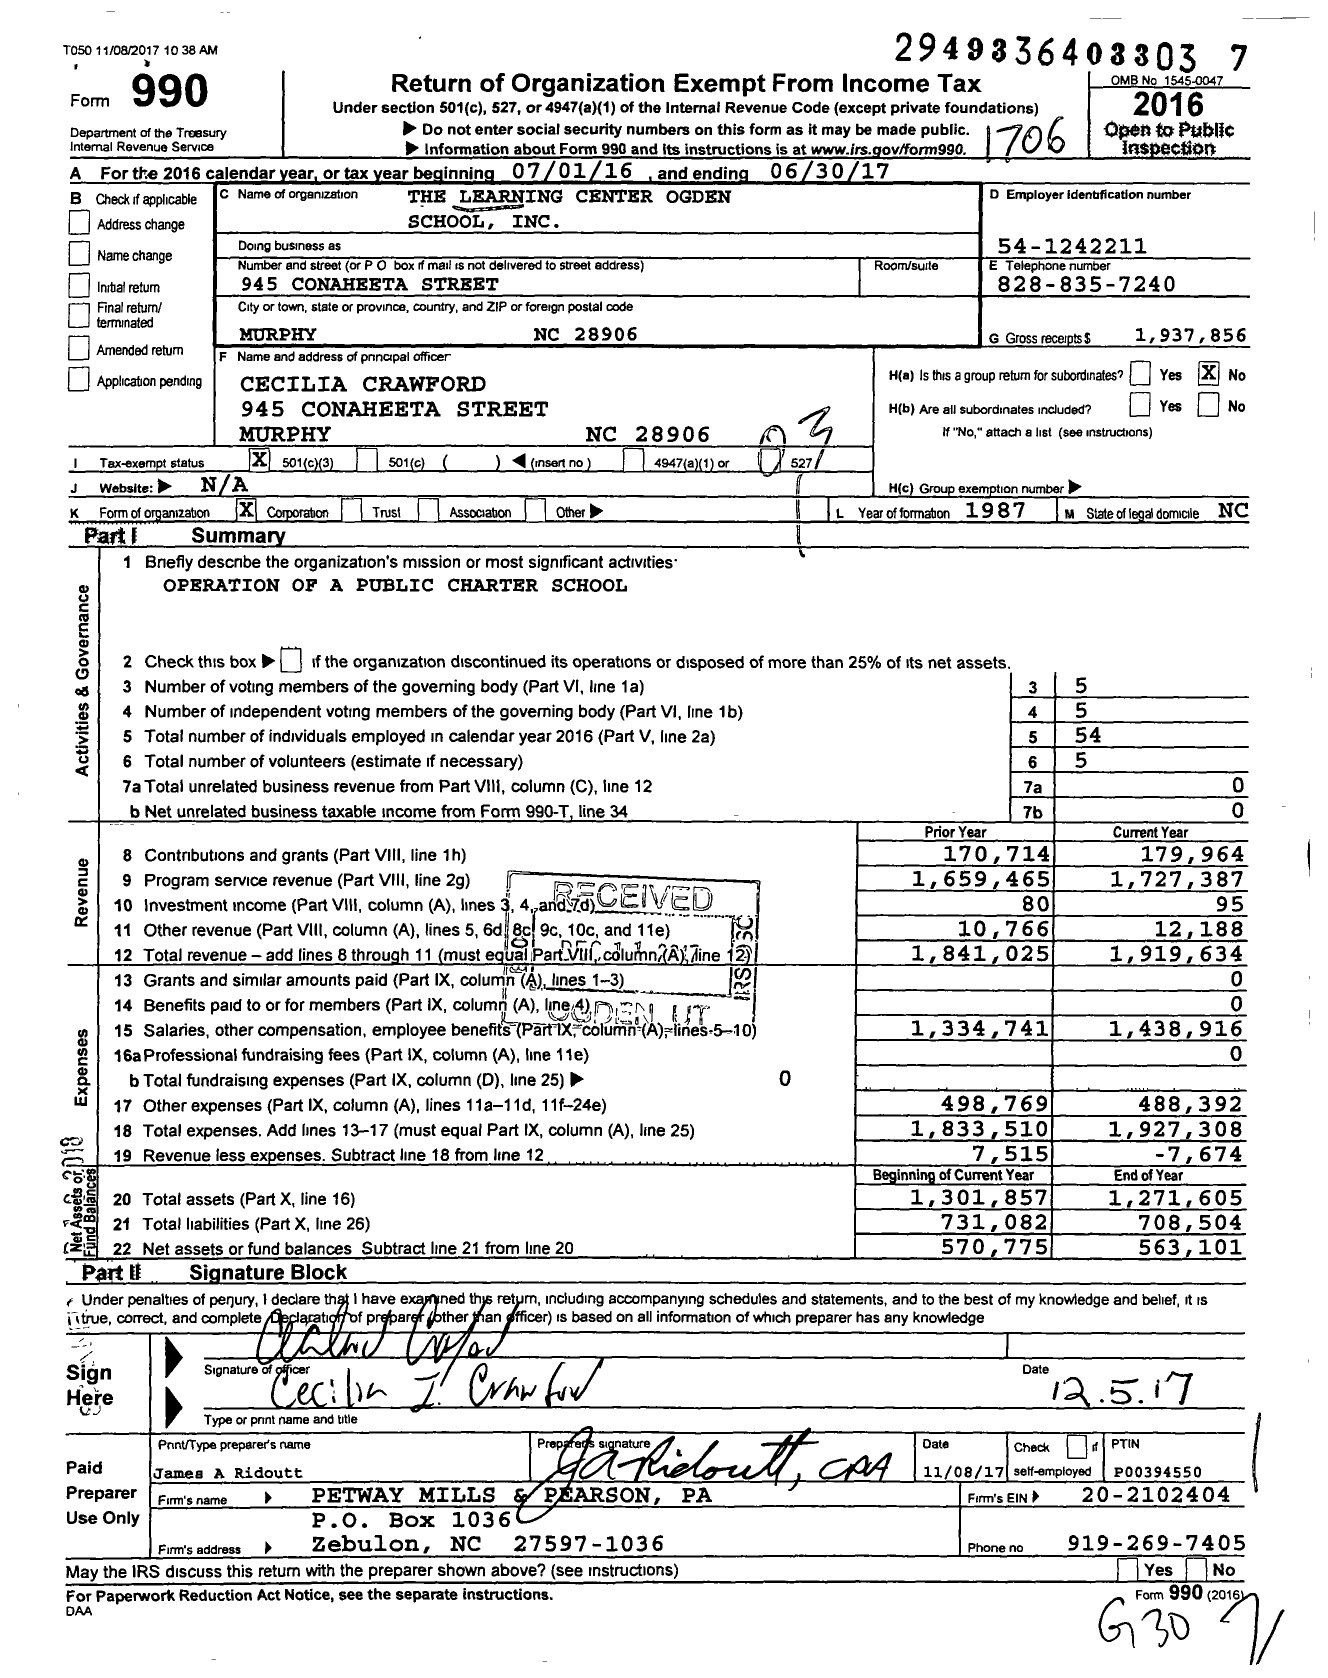 Image of first page of 2016 Form 990 for The Learning Center Ogden School